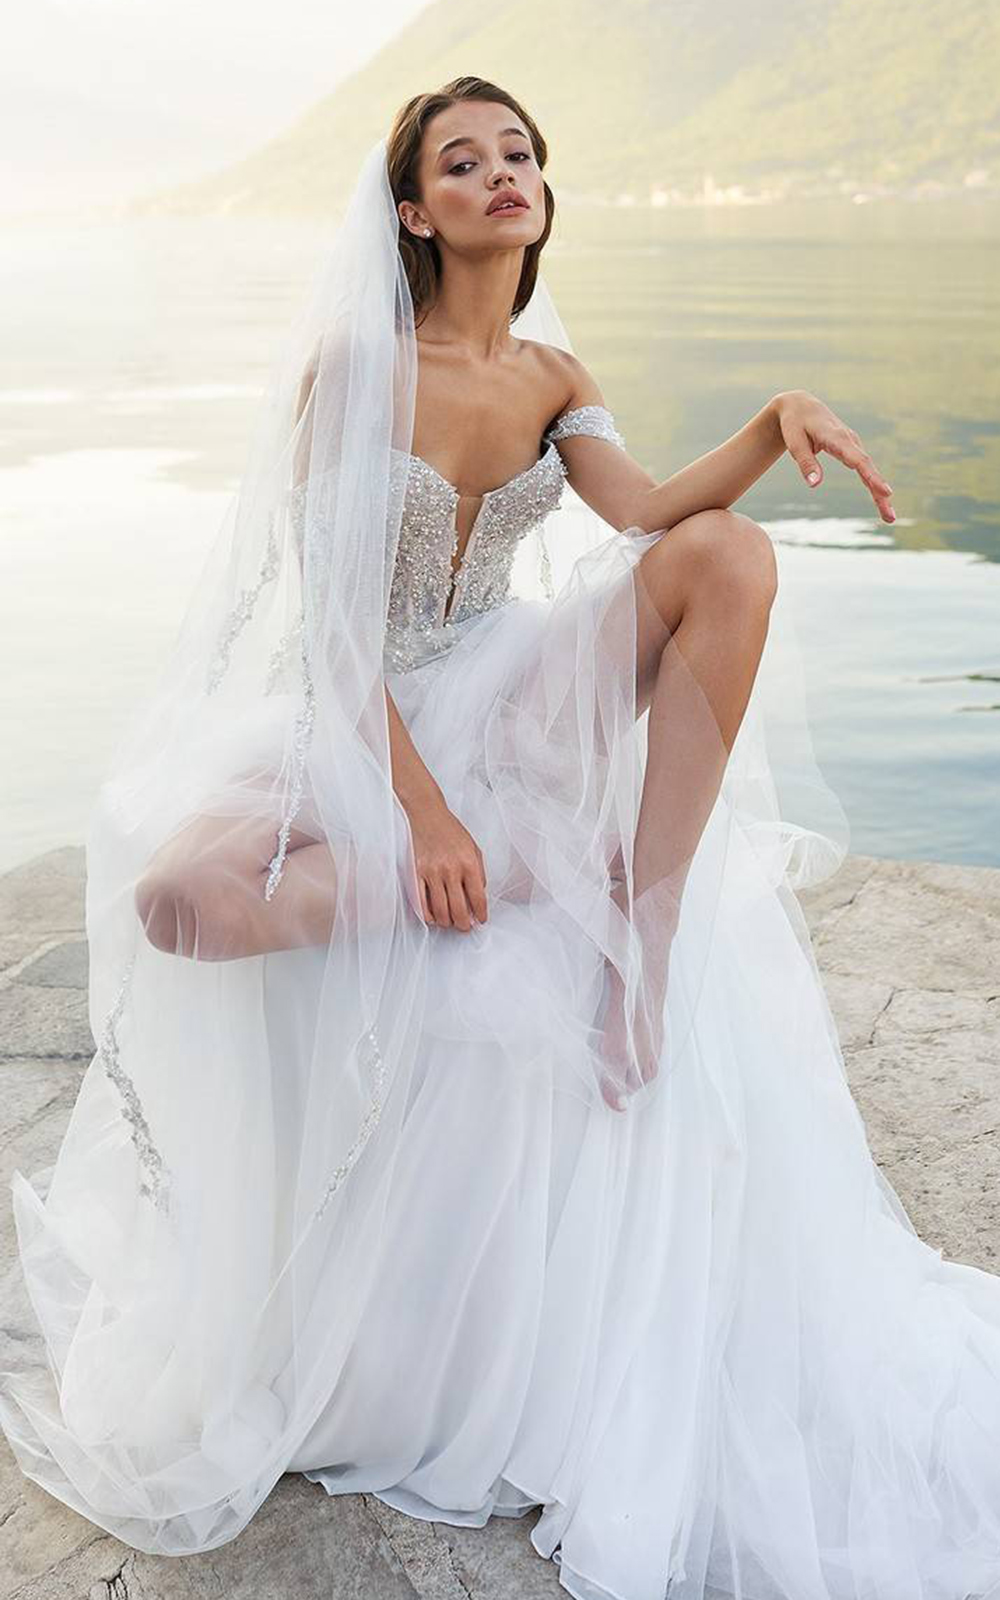 Best lace wedding dress: 10 lace bridal gowns to shop in 2023